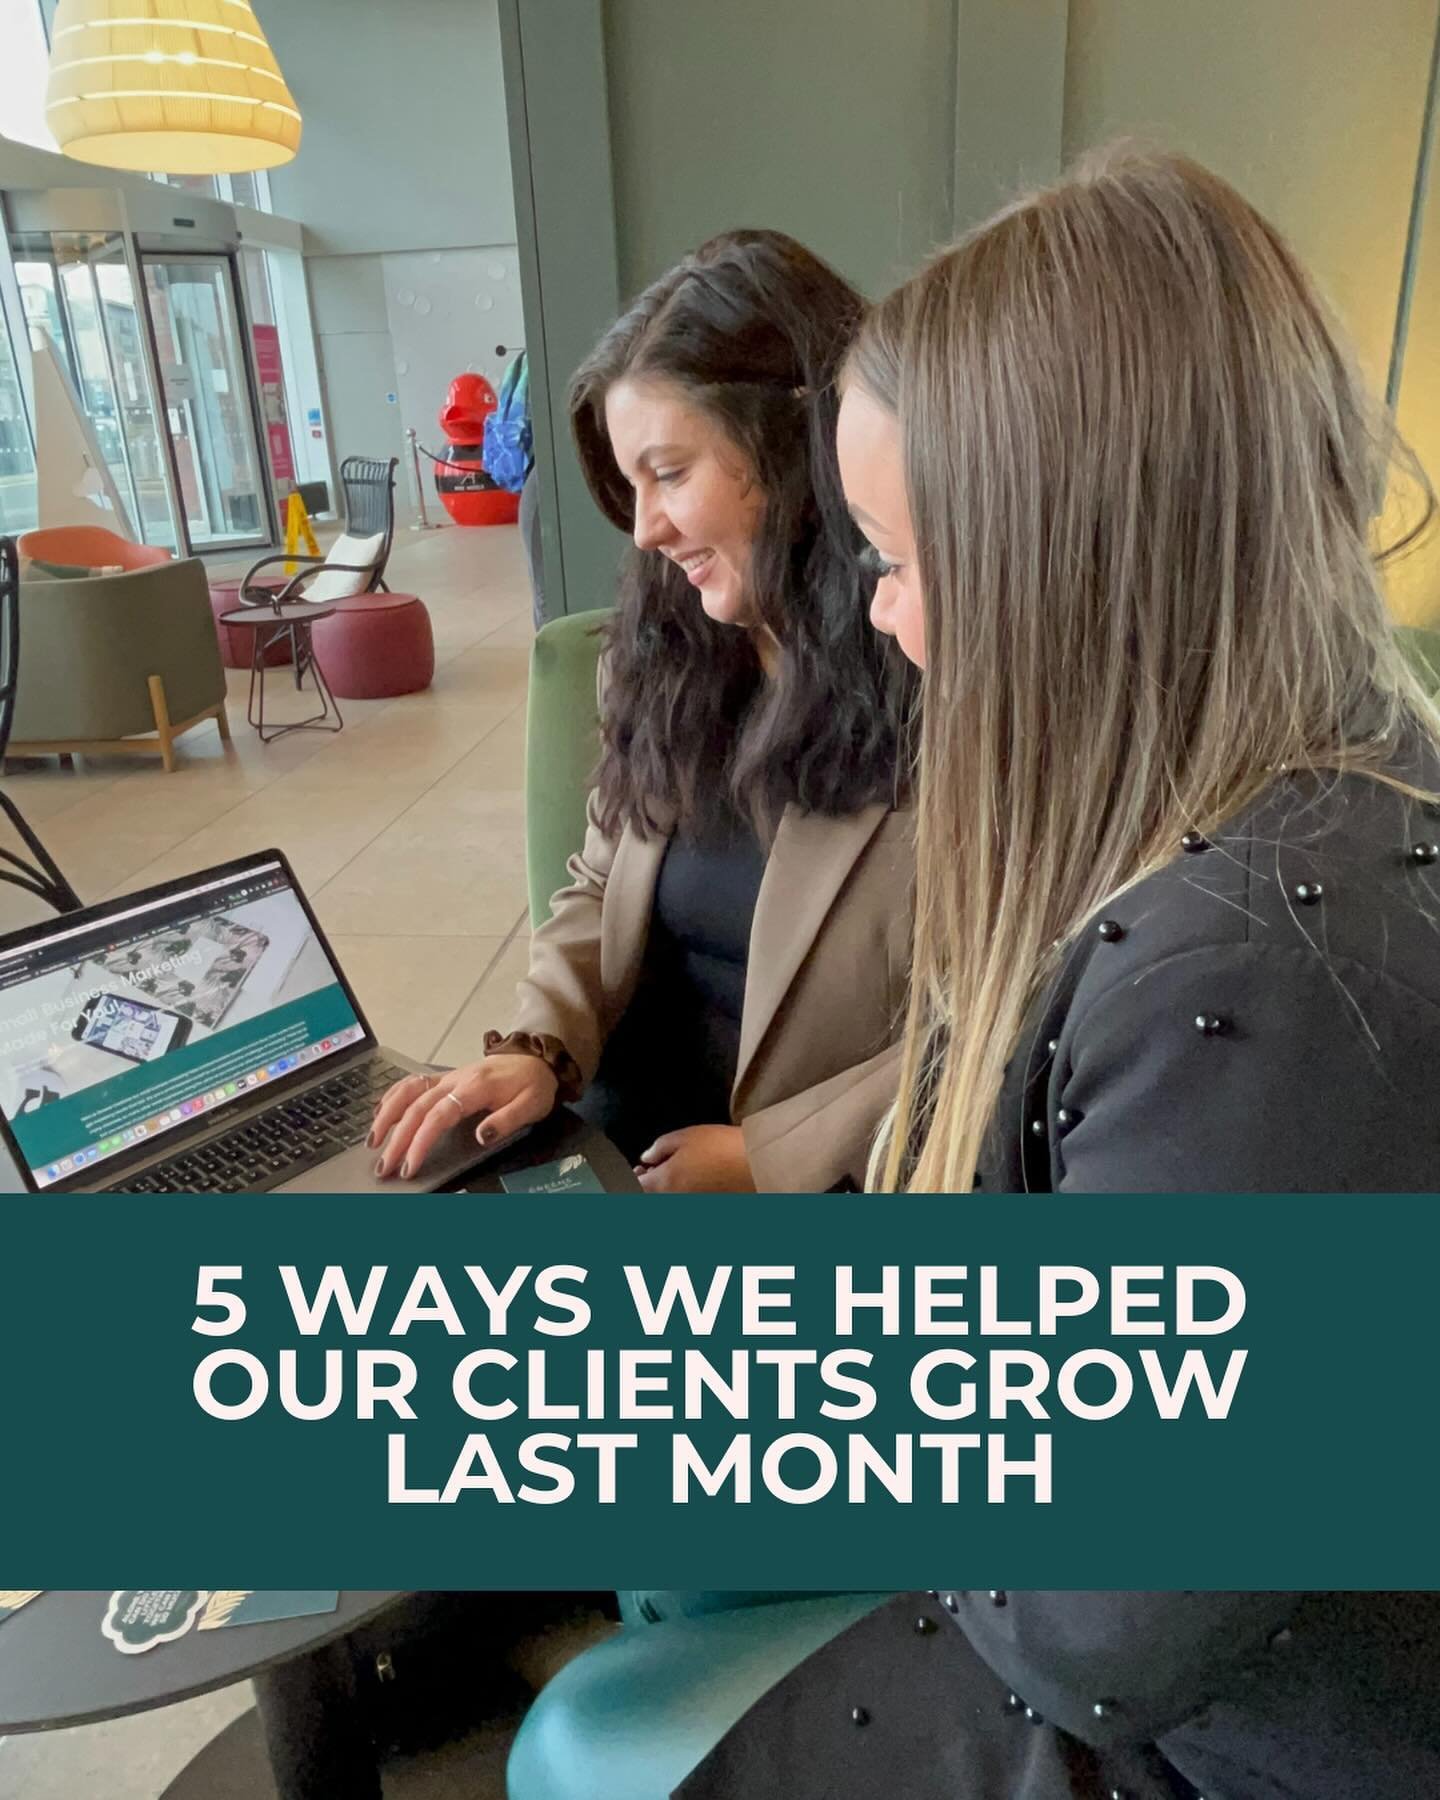 Since these posts on what we do to grow GC every month do well, we thought we&rsquo;d share some insights into how we&rsquo;ve helped our clients grow.

April has been busssssy for both Danni and Niamh. Here&rsquo;s a small snippet of the month:
💘Ca